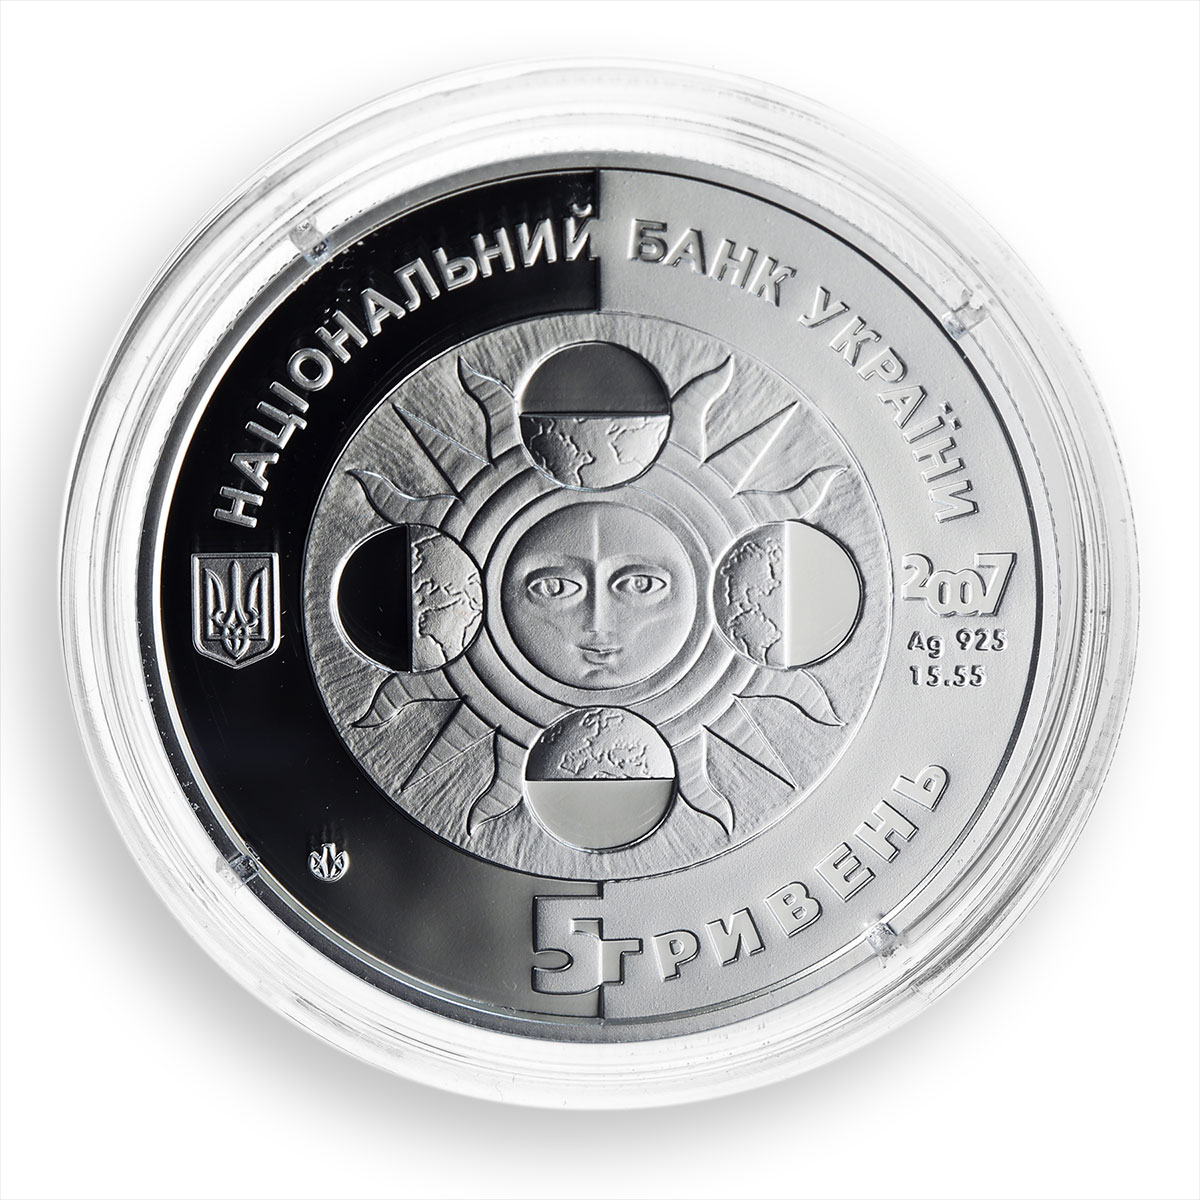 Ukraine 5 hryvnia Scorpion Signs of Zodiac silver proof coin 2007